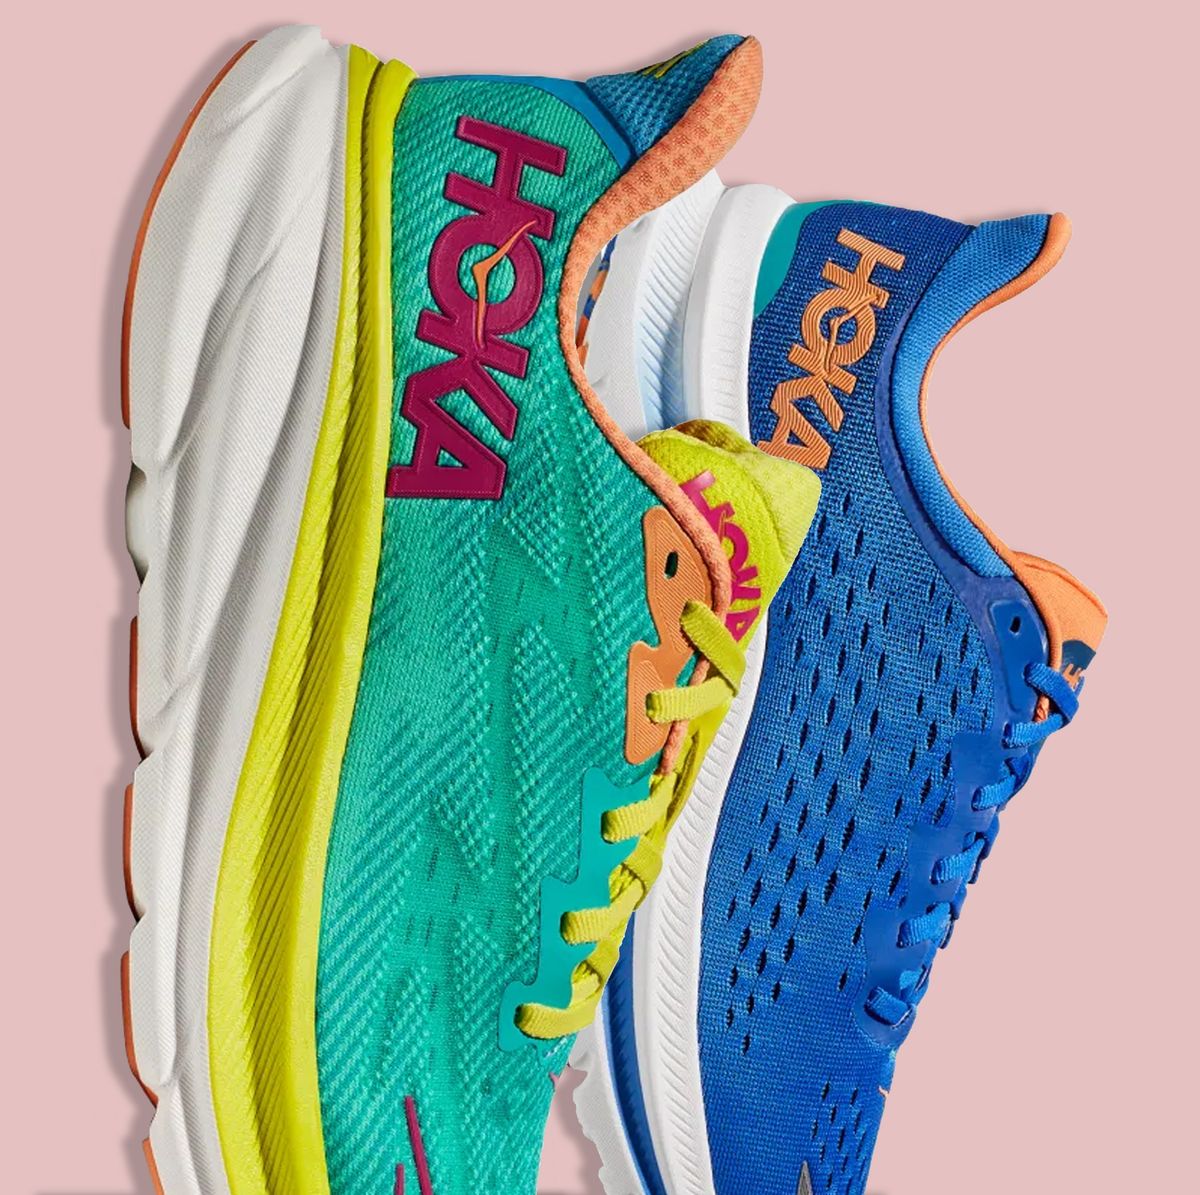 Hoka One Space Athletic Shoes for Women